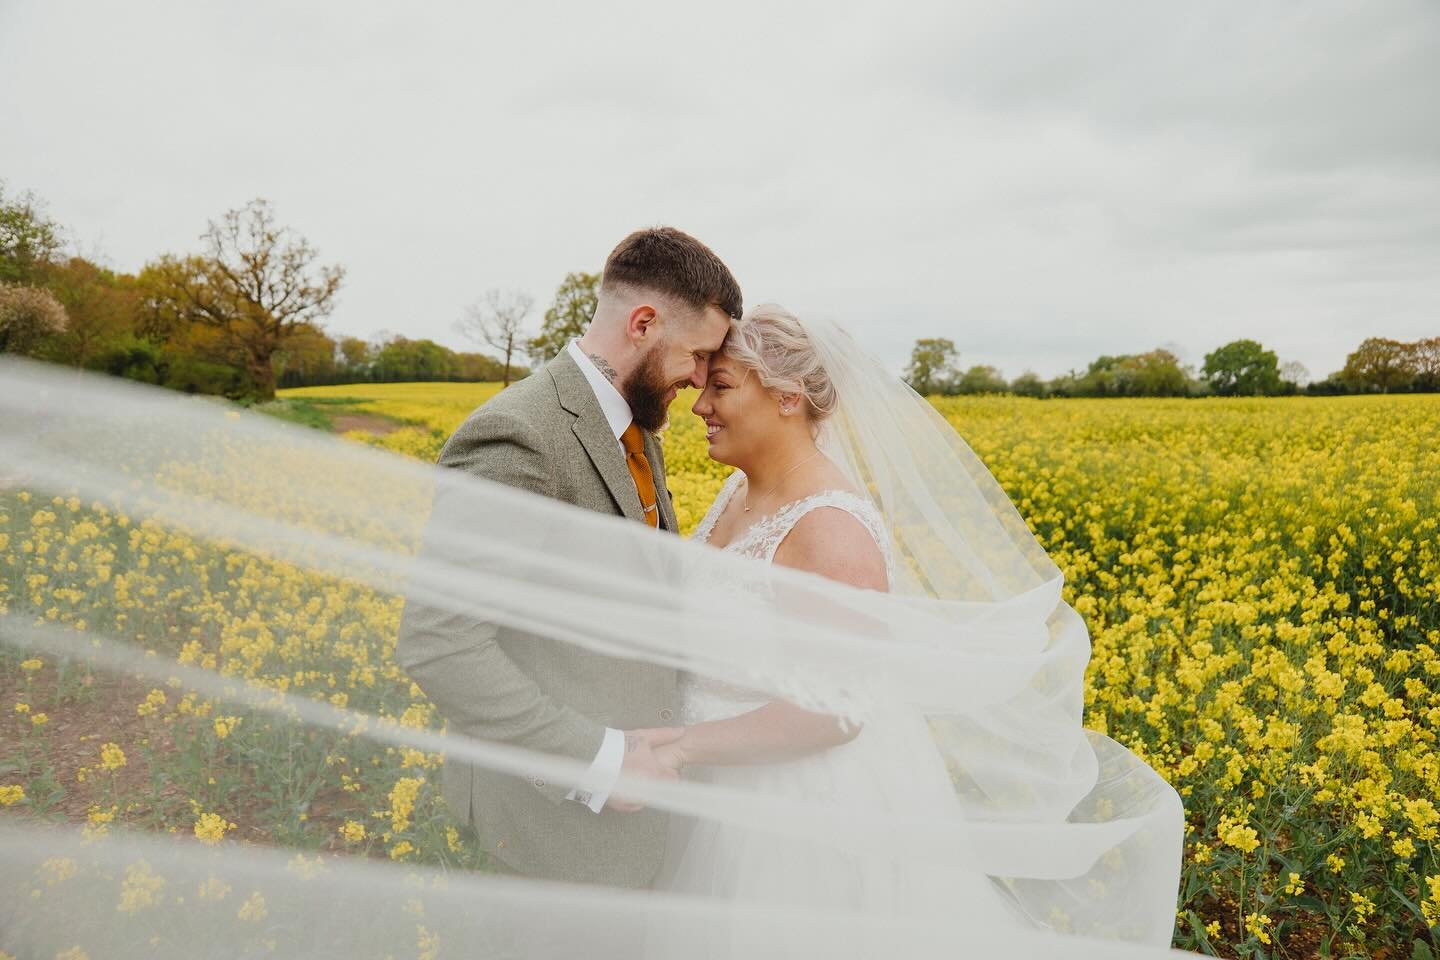 Beck &amp; Alex&rsquo;s wedding portraits 💛🌼✨

When I saw these rapeseed fields blooming, I had to ask Beck &amp; Alex if there were any near the church they got married at. Luckily there were! I&rsquo;m so happy we got some shots in this beautiful